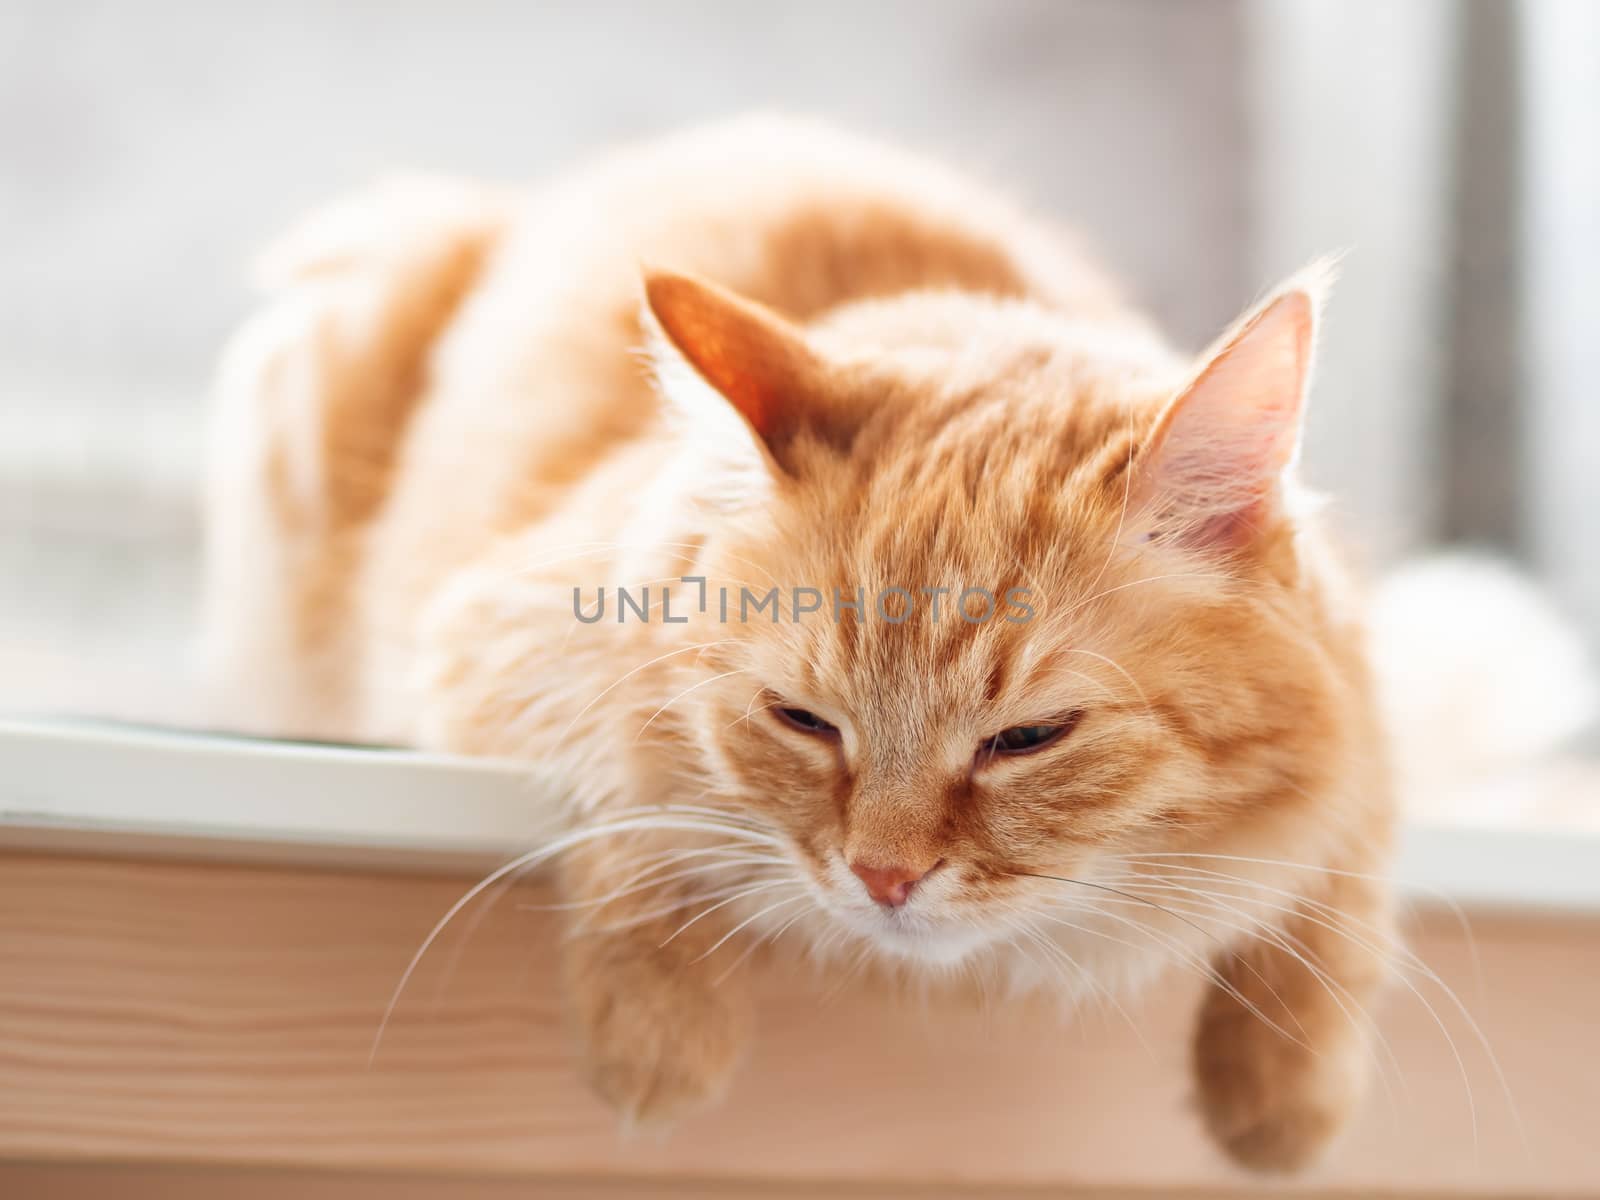 Close up portrait of cute ginger cat. Fluffy pet is sleeping. Domestic kitty on table.